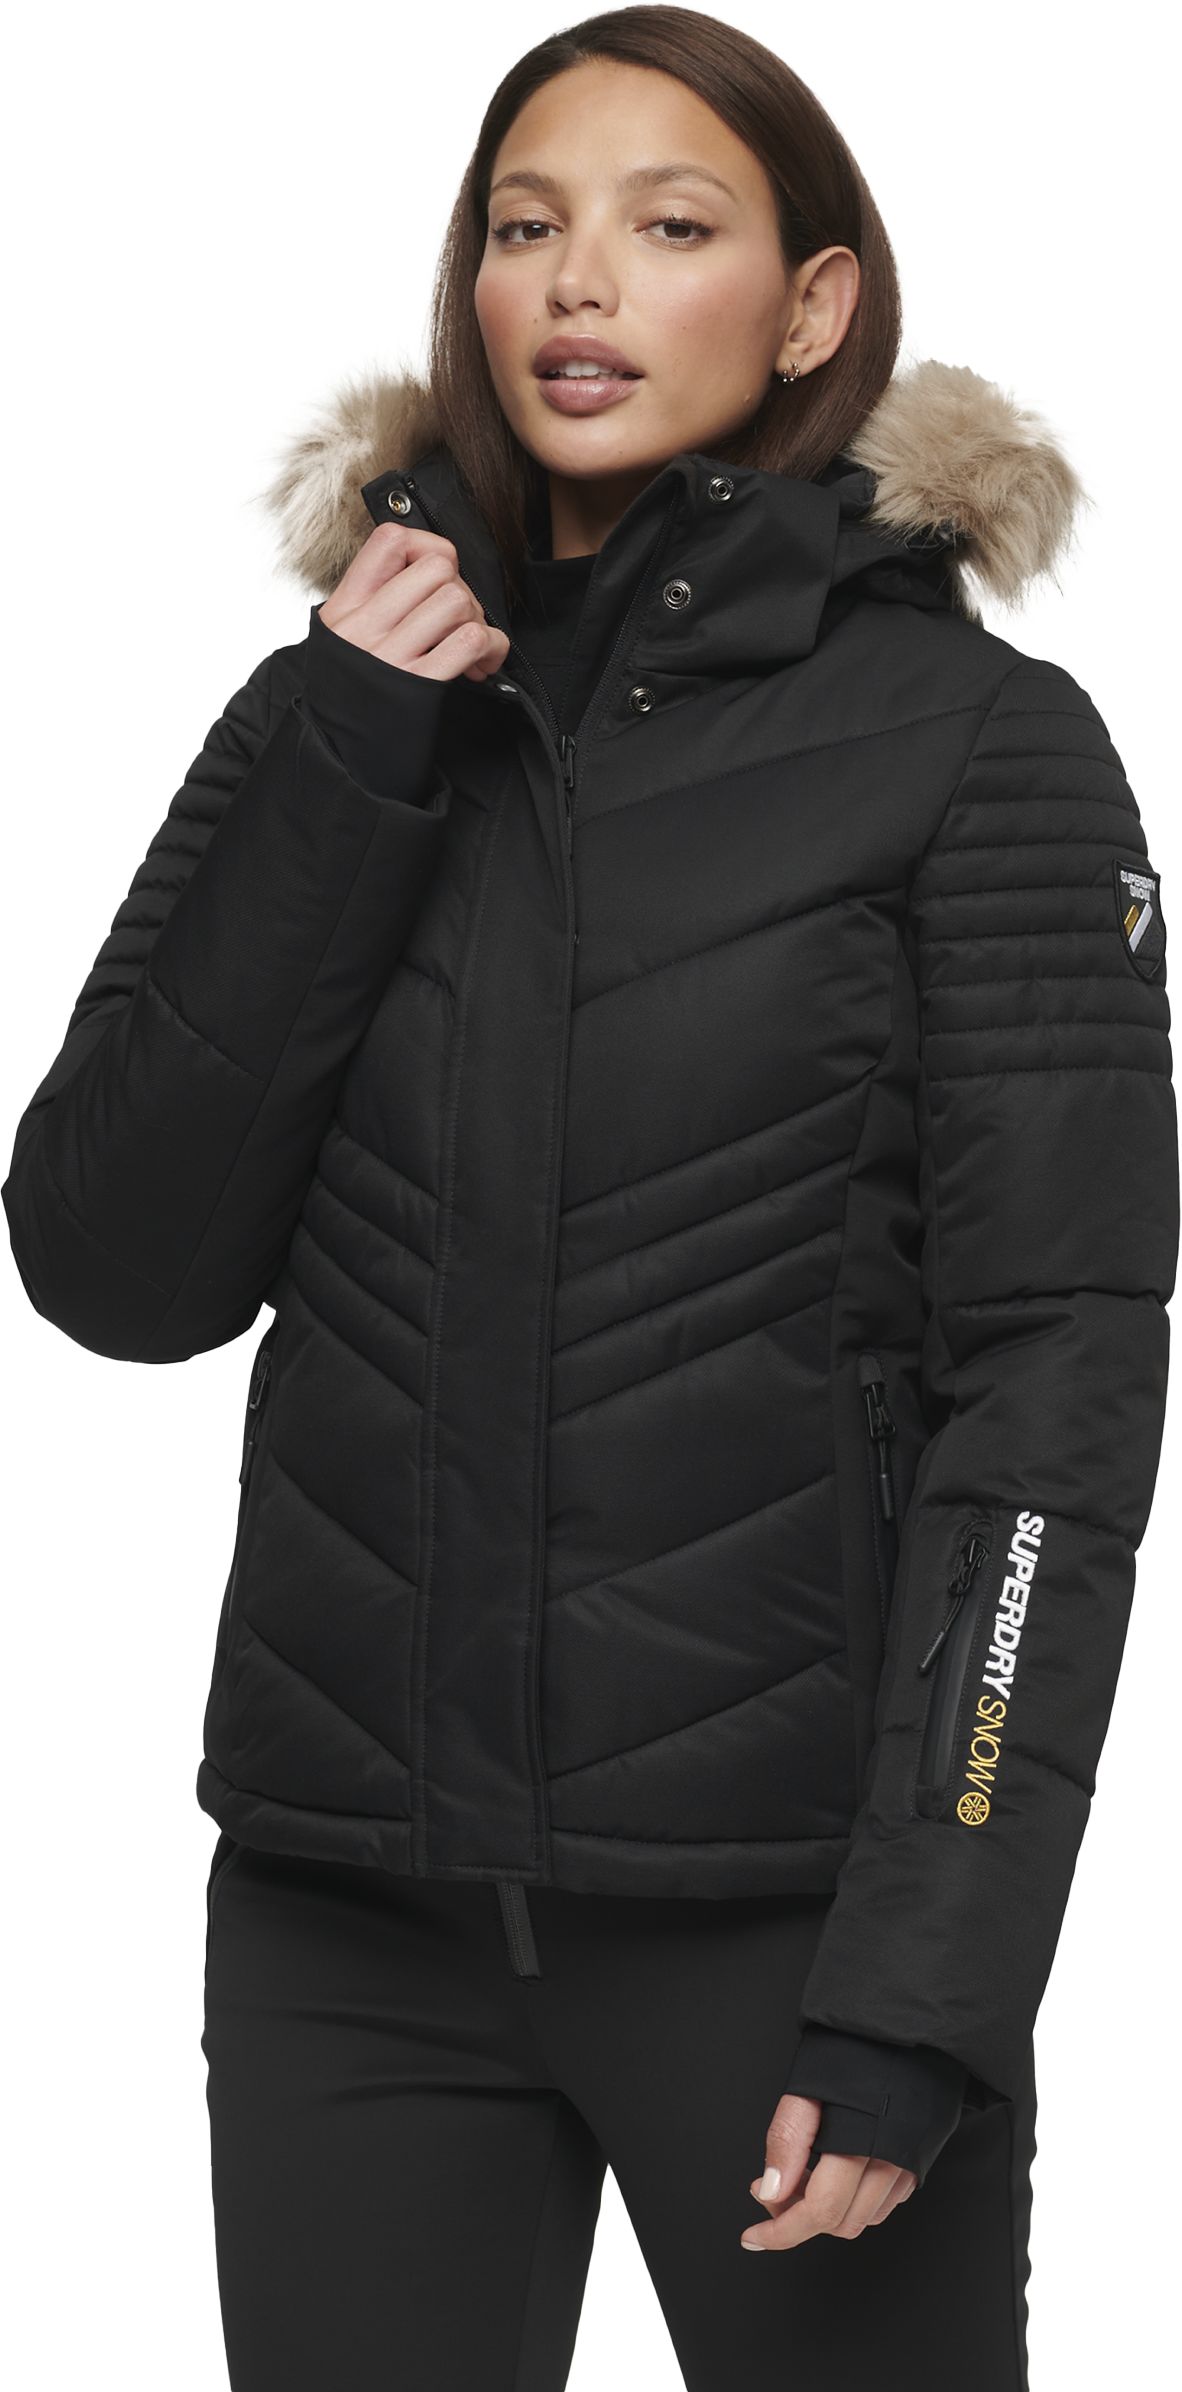 SUPERDRY, SKI LUXE PUFFER JACKET